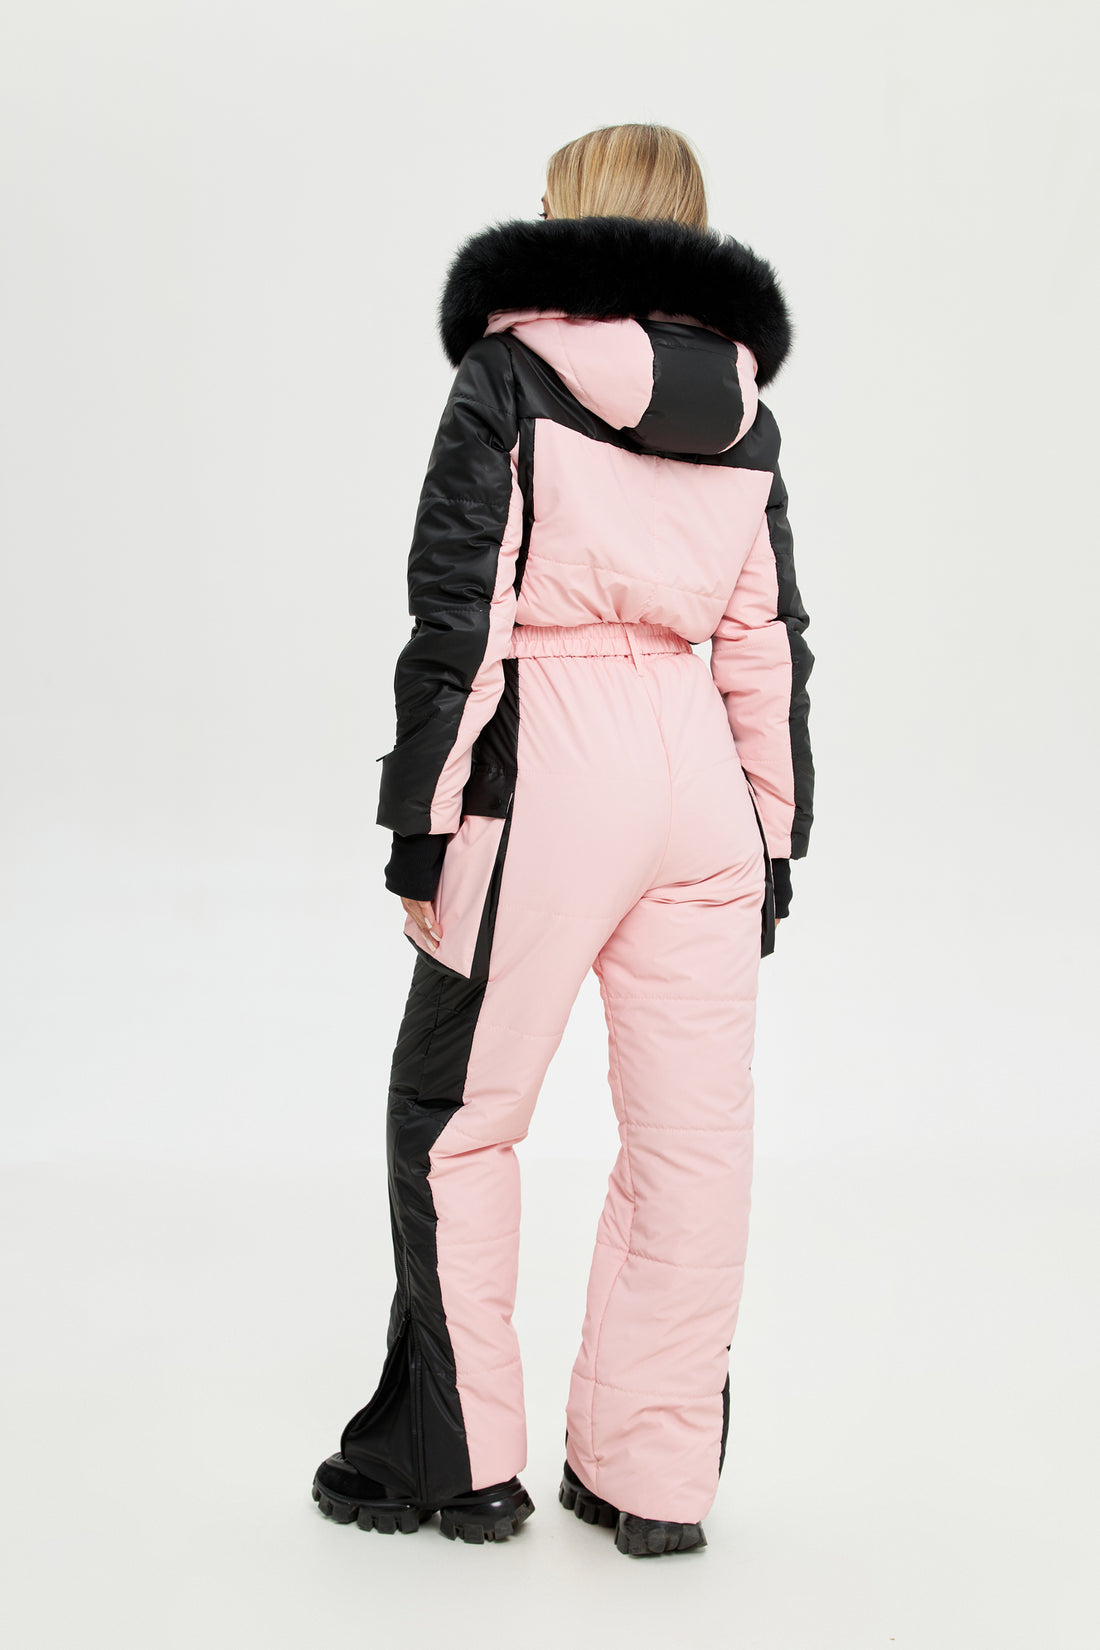 Blush pink ski suits for women one piece ETNA - Pink one piece - Warm snowsuit women outfit